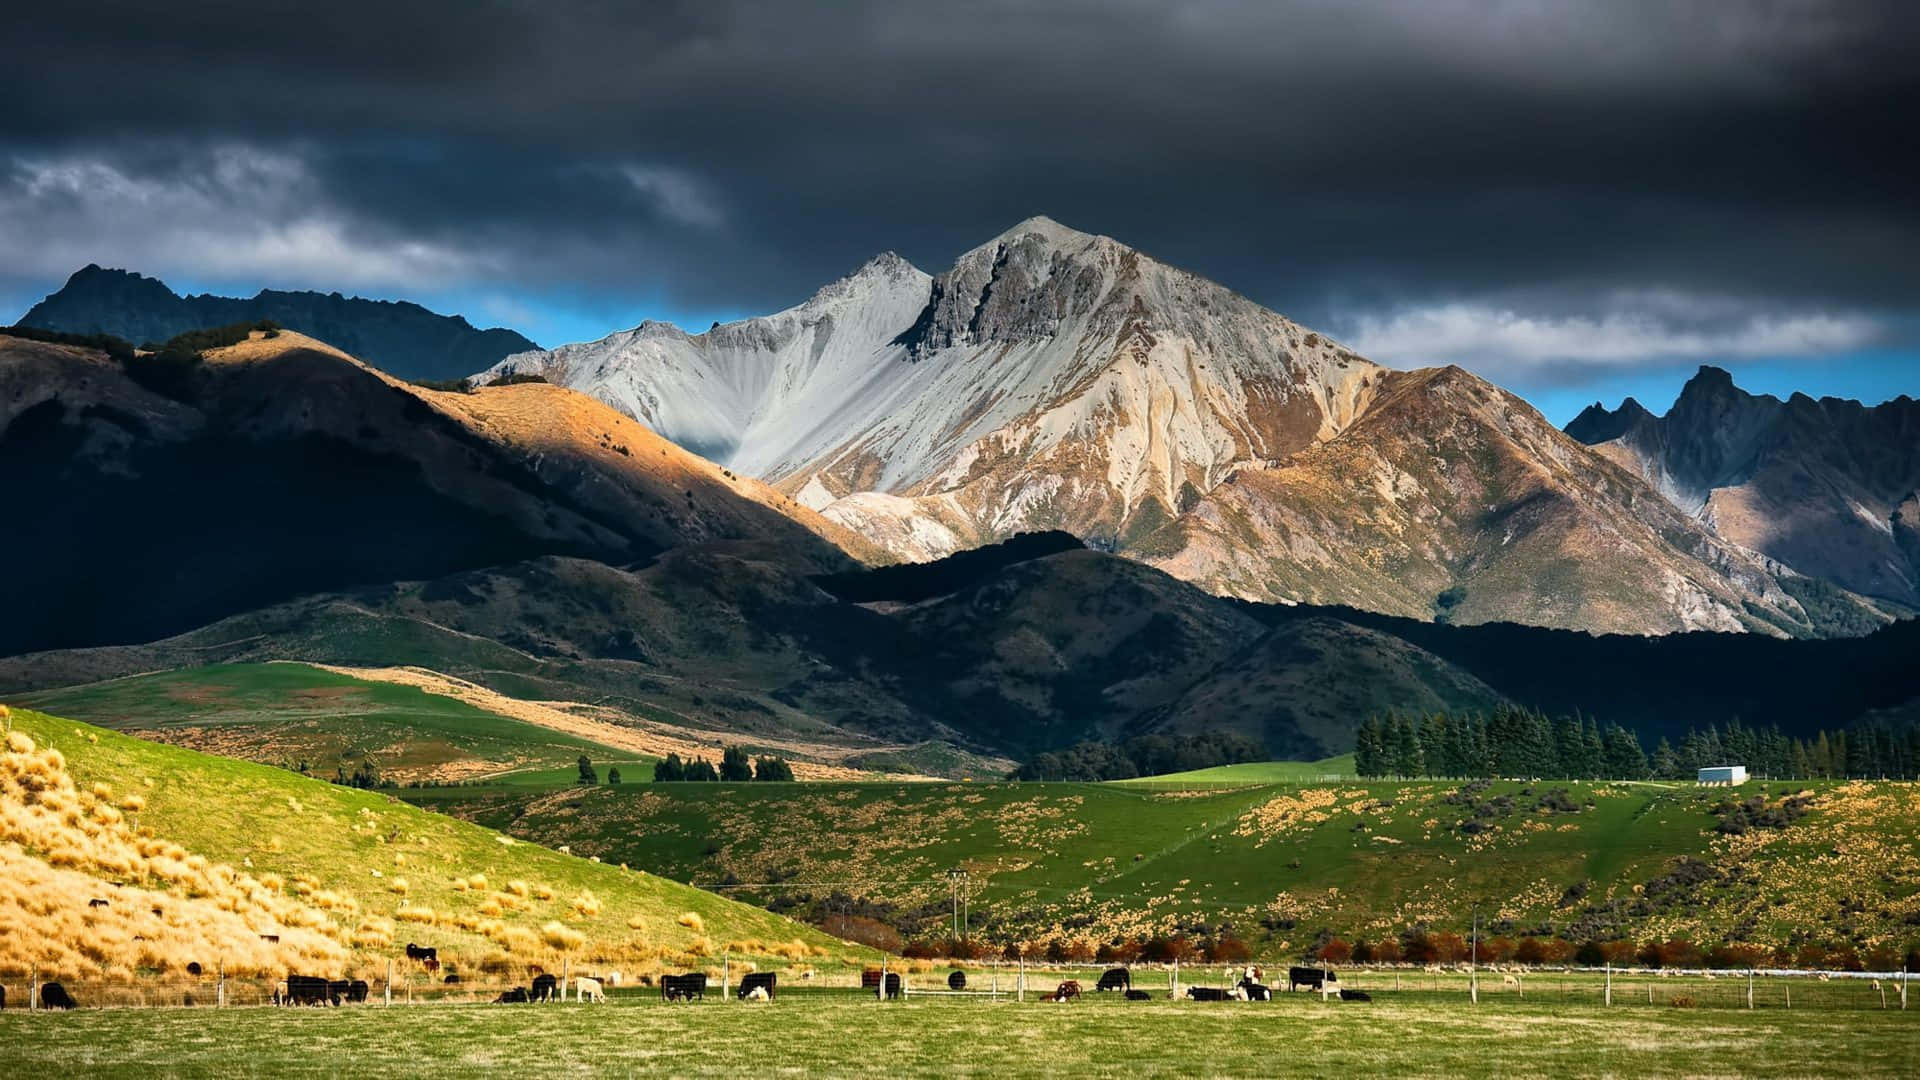 Enchanting mountain landscape at sunset in New Zealand